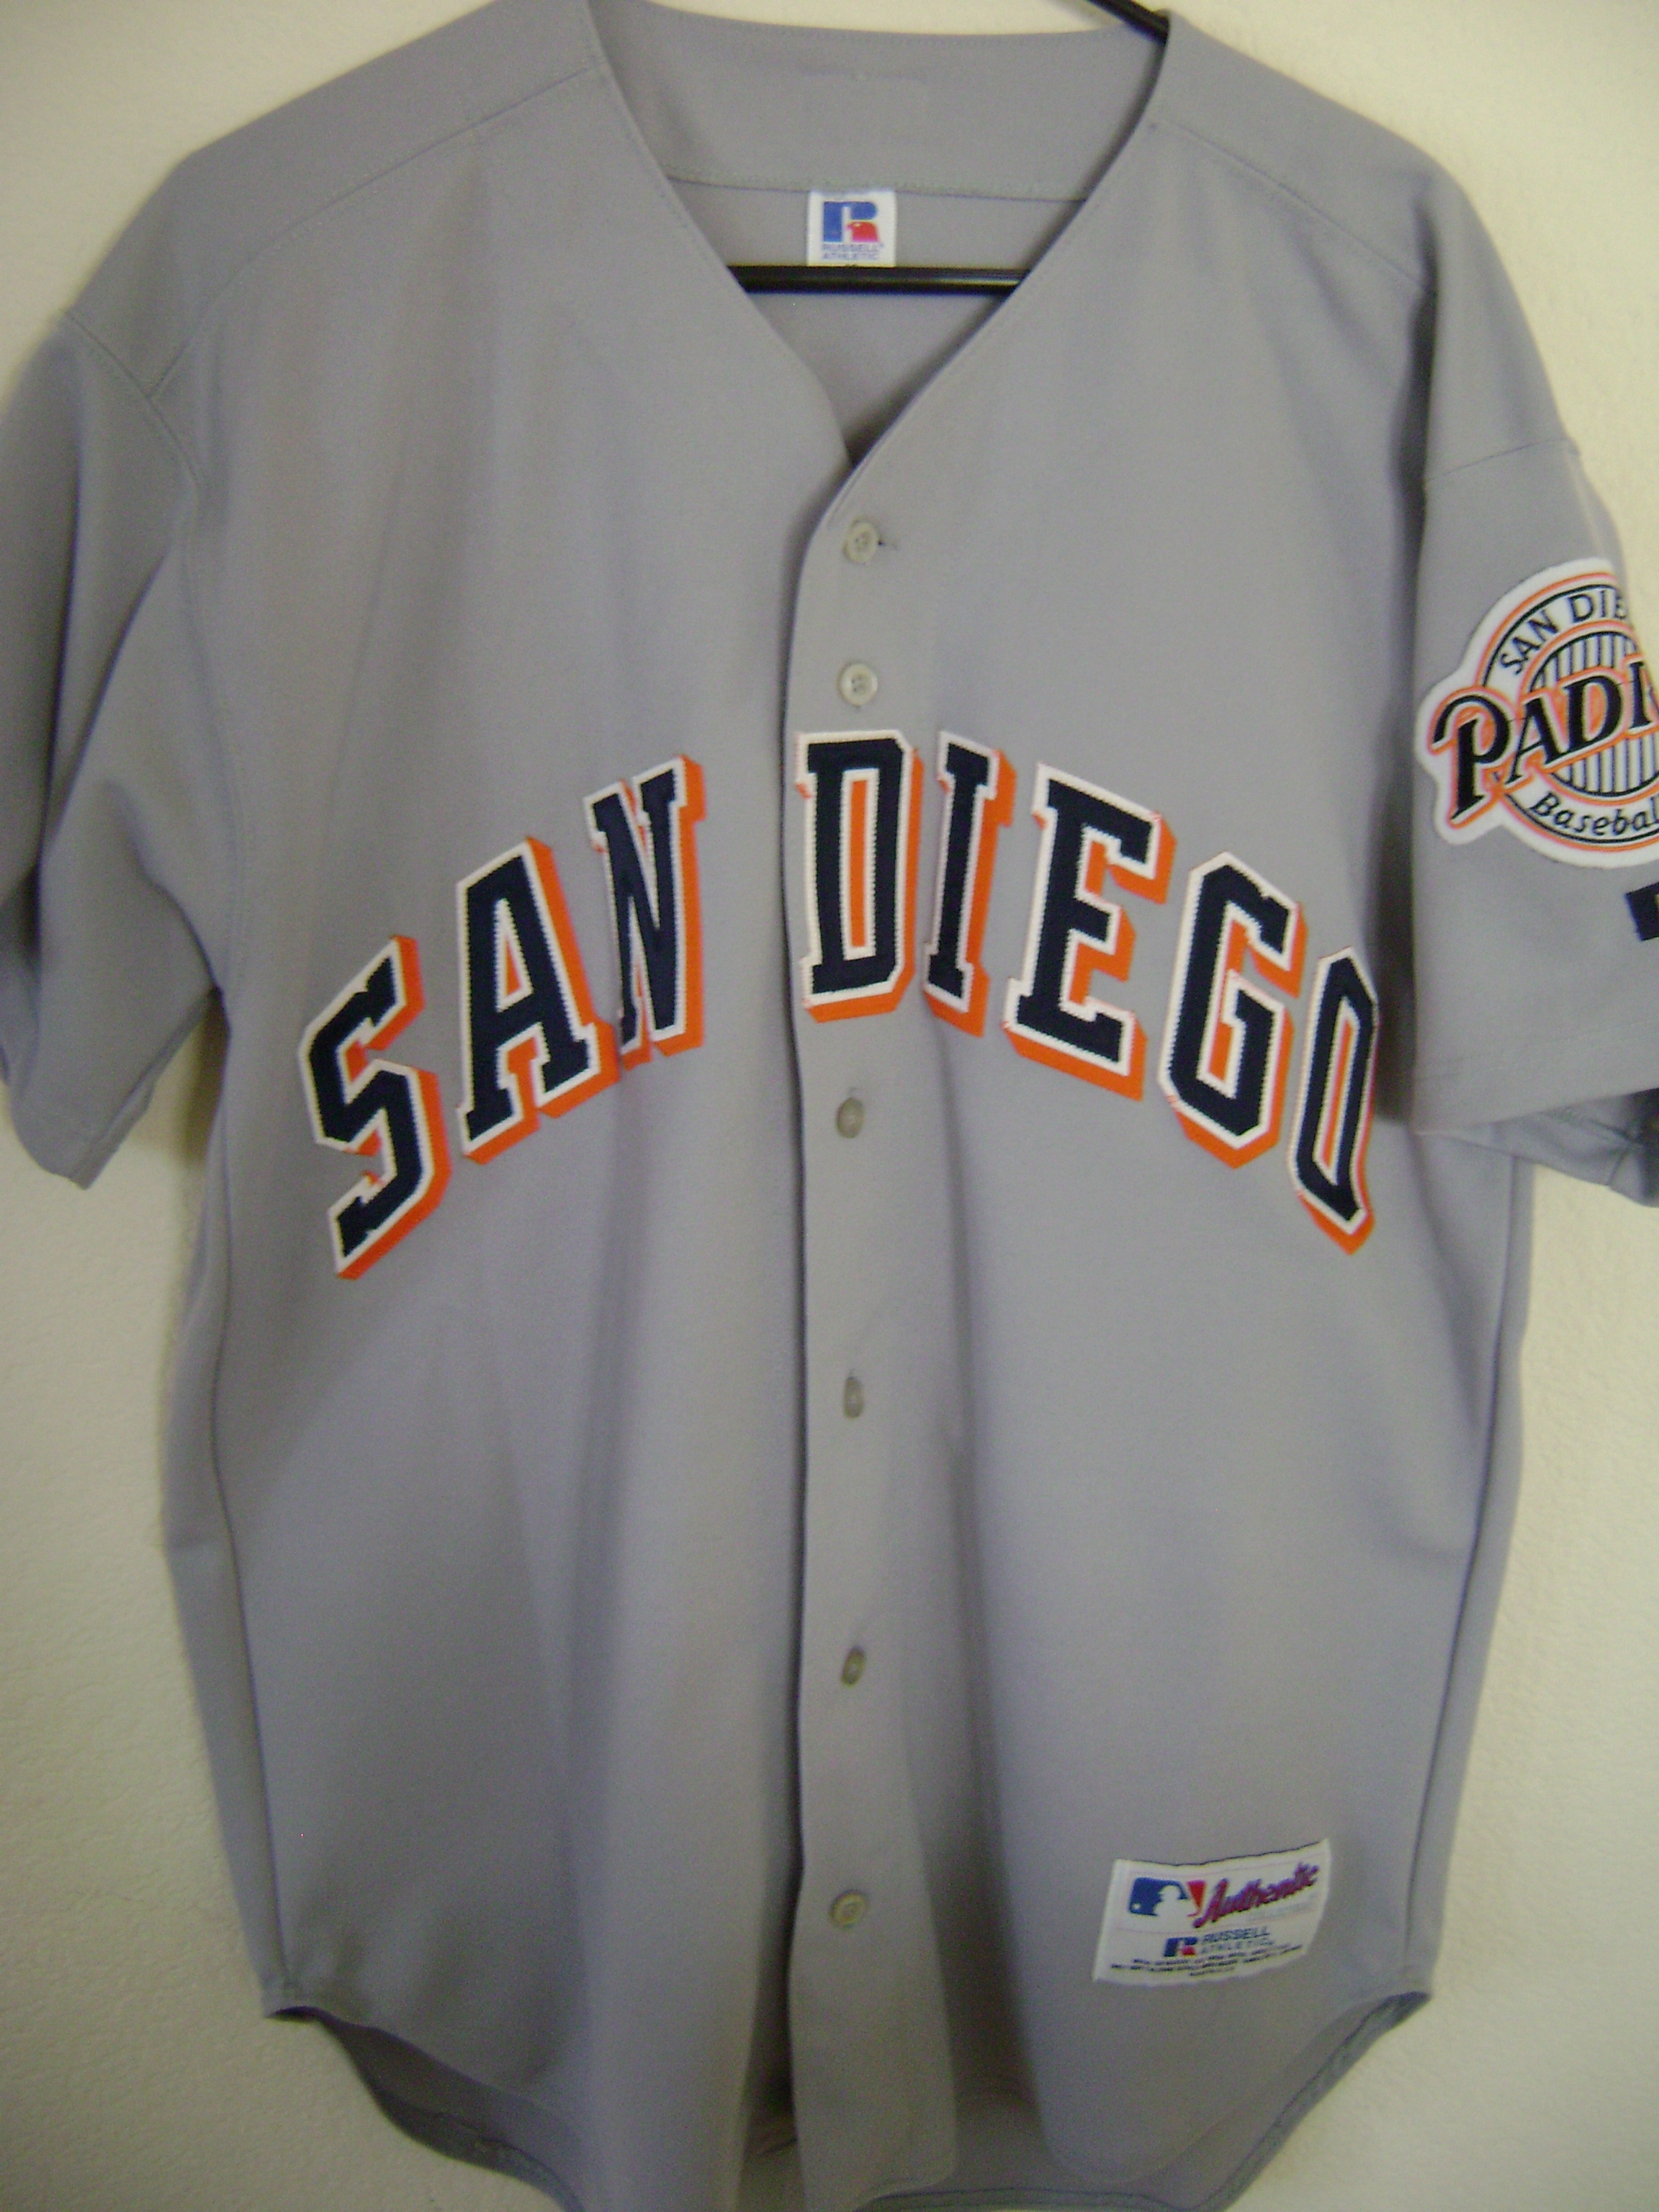 90s padres jersey